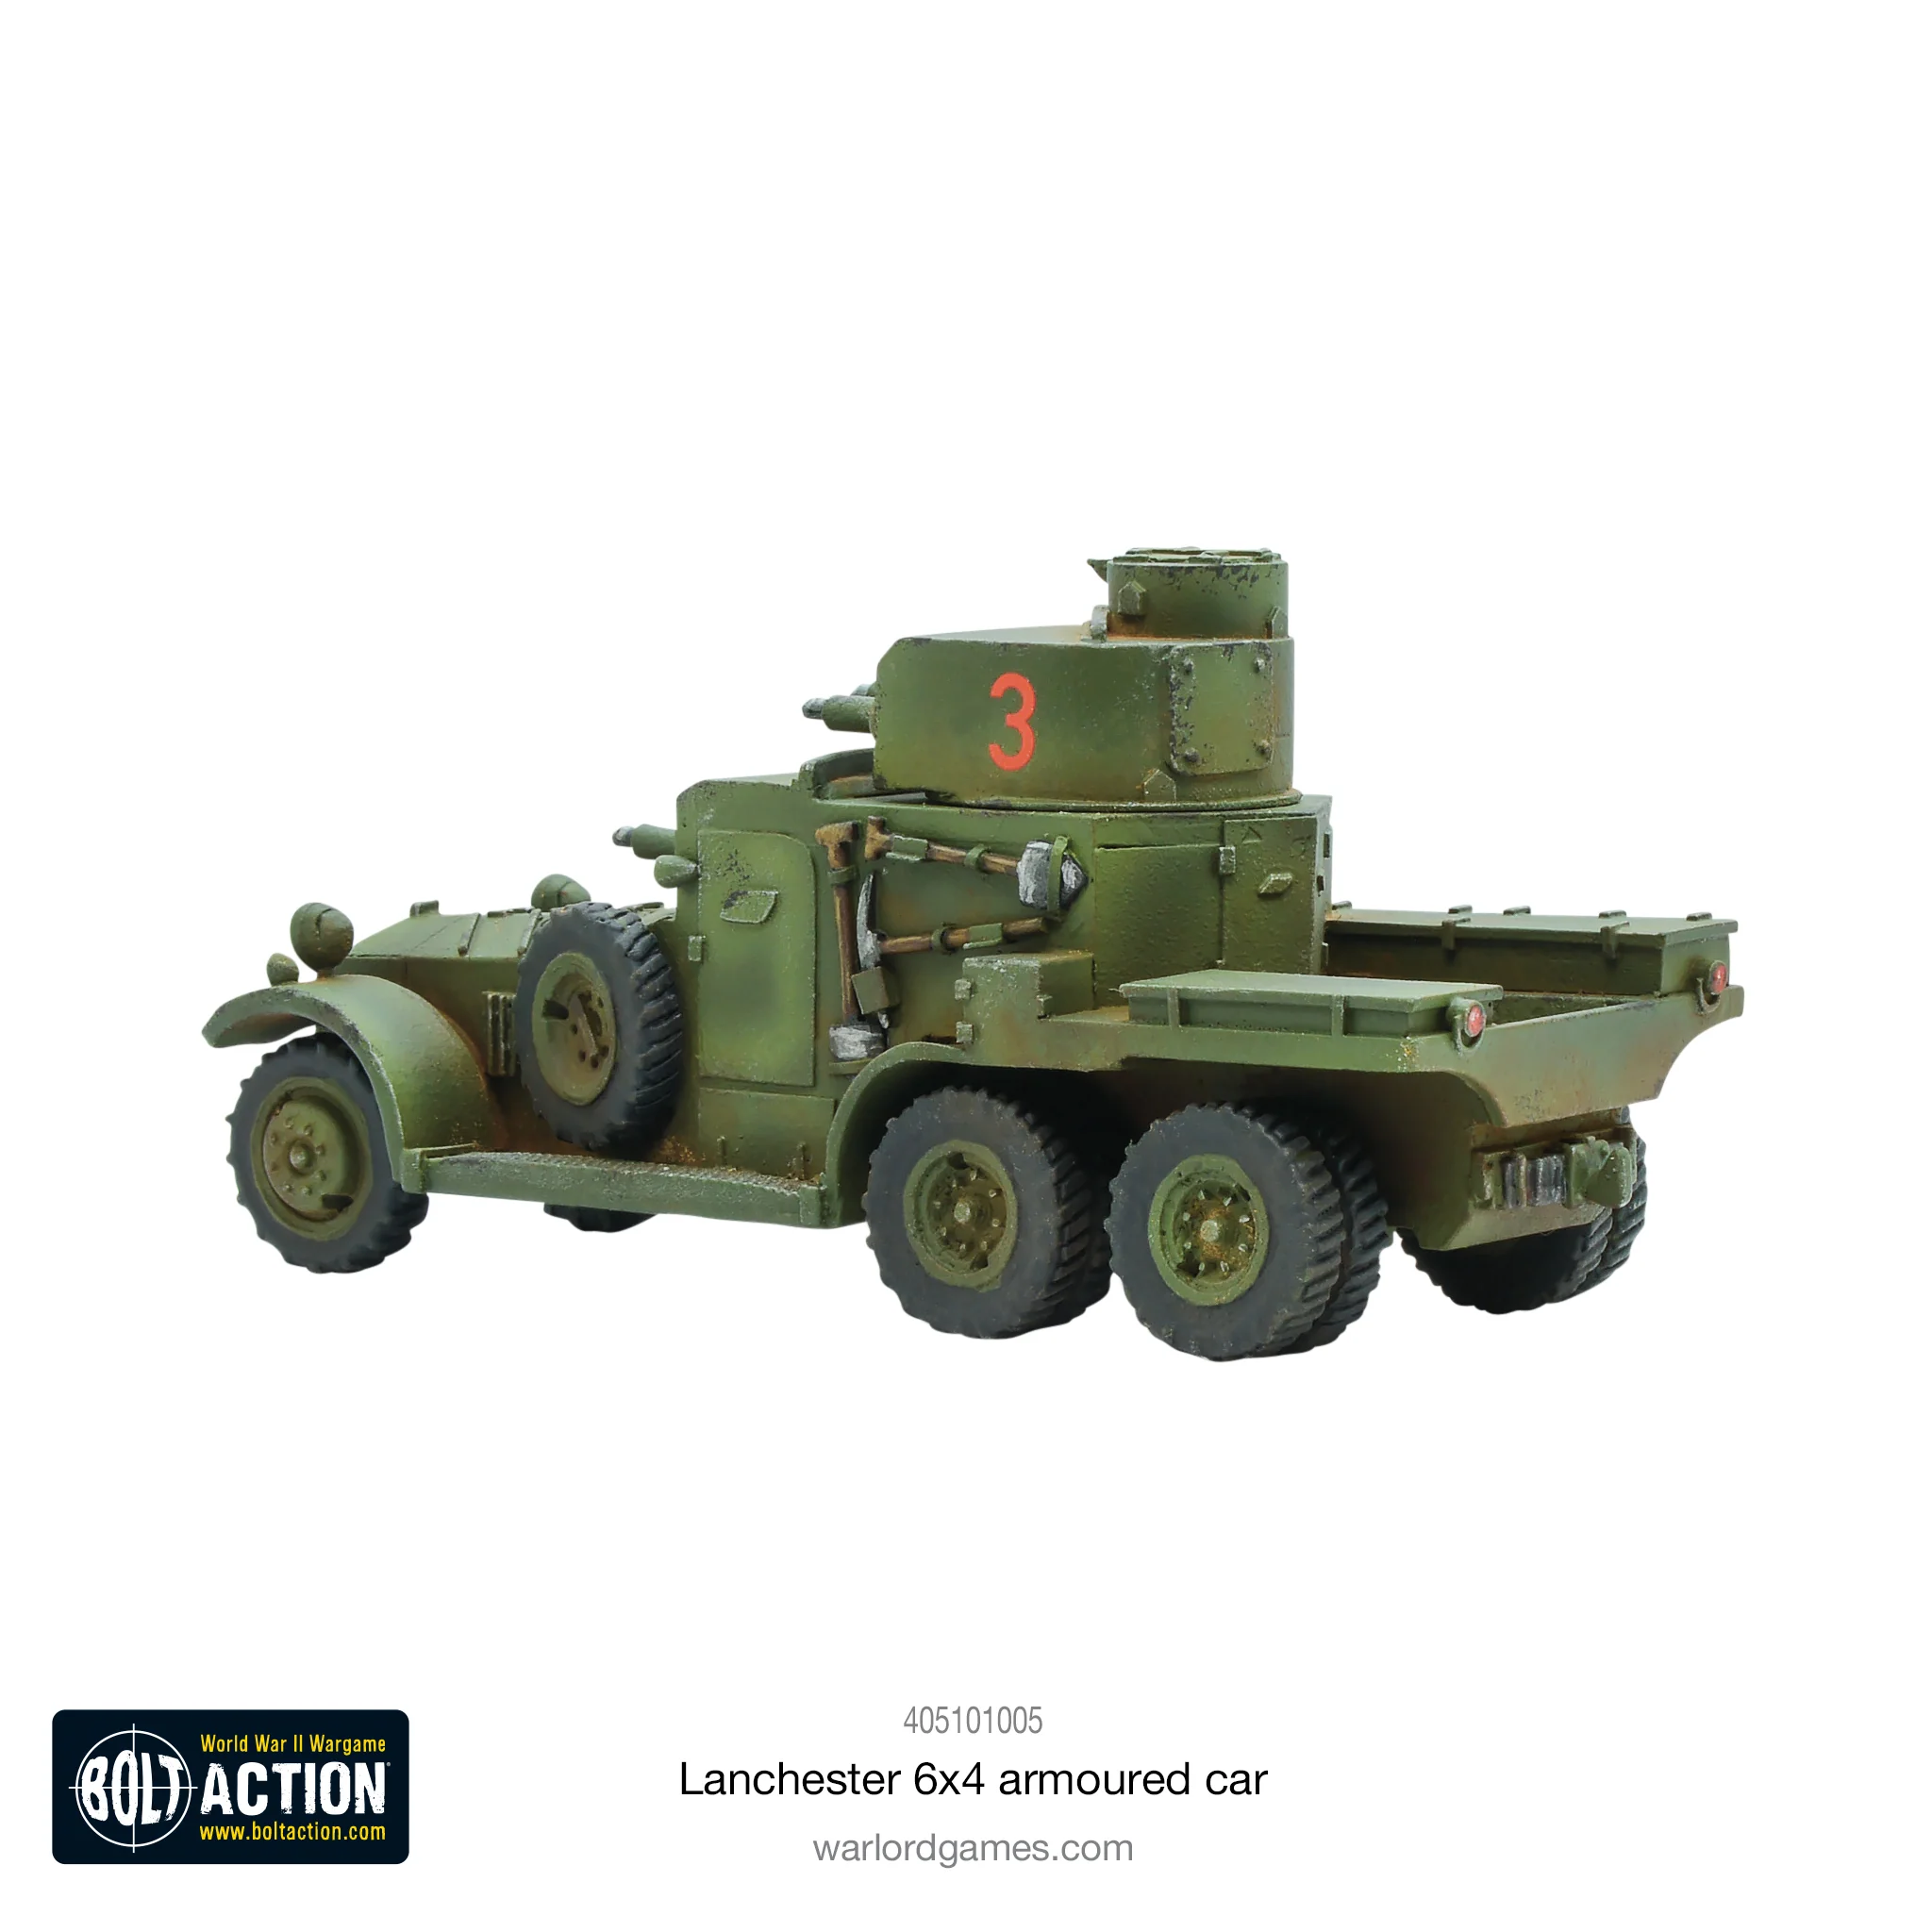 Lanchester 6x4 Armoured Car-1710243307-v4oWY.webp